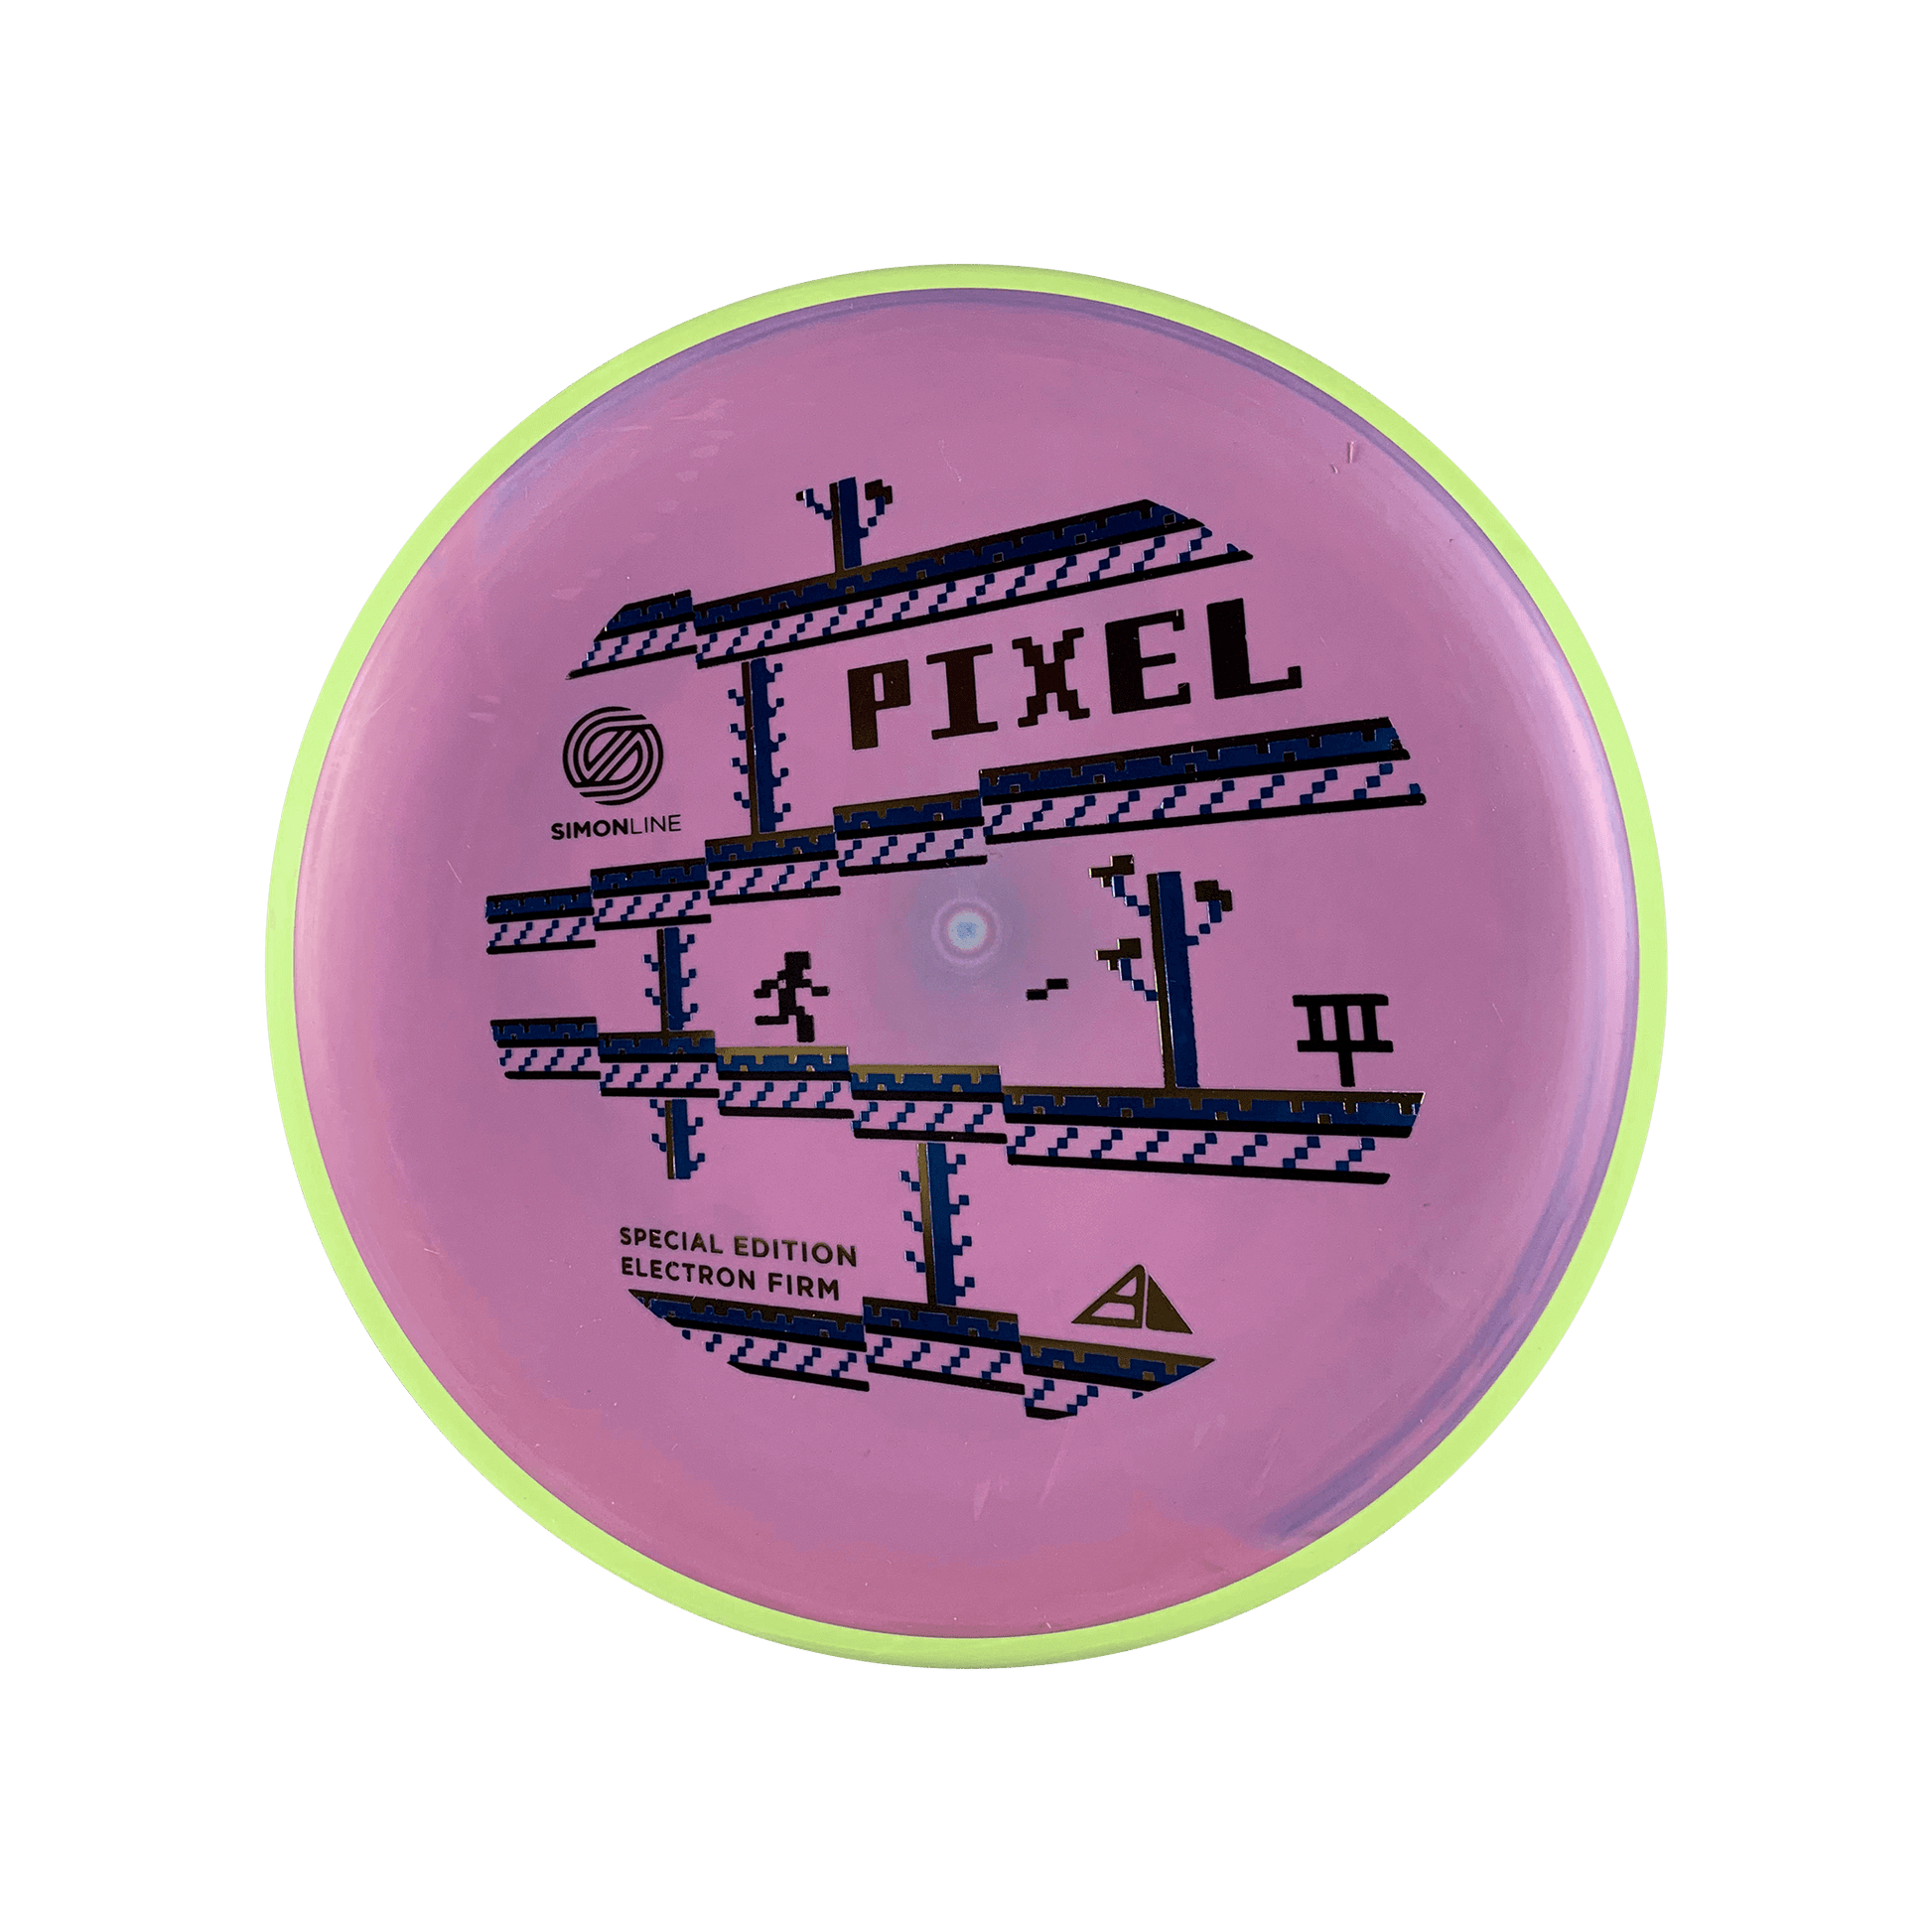 Electron Firm Pixel - Special Edition Disc Axiom multi / purple hot pink 174 